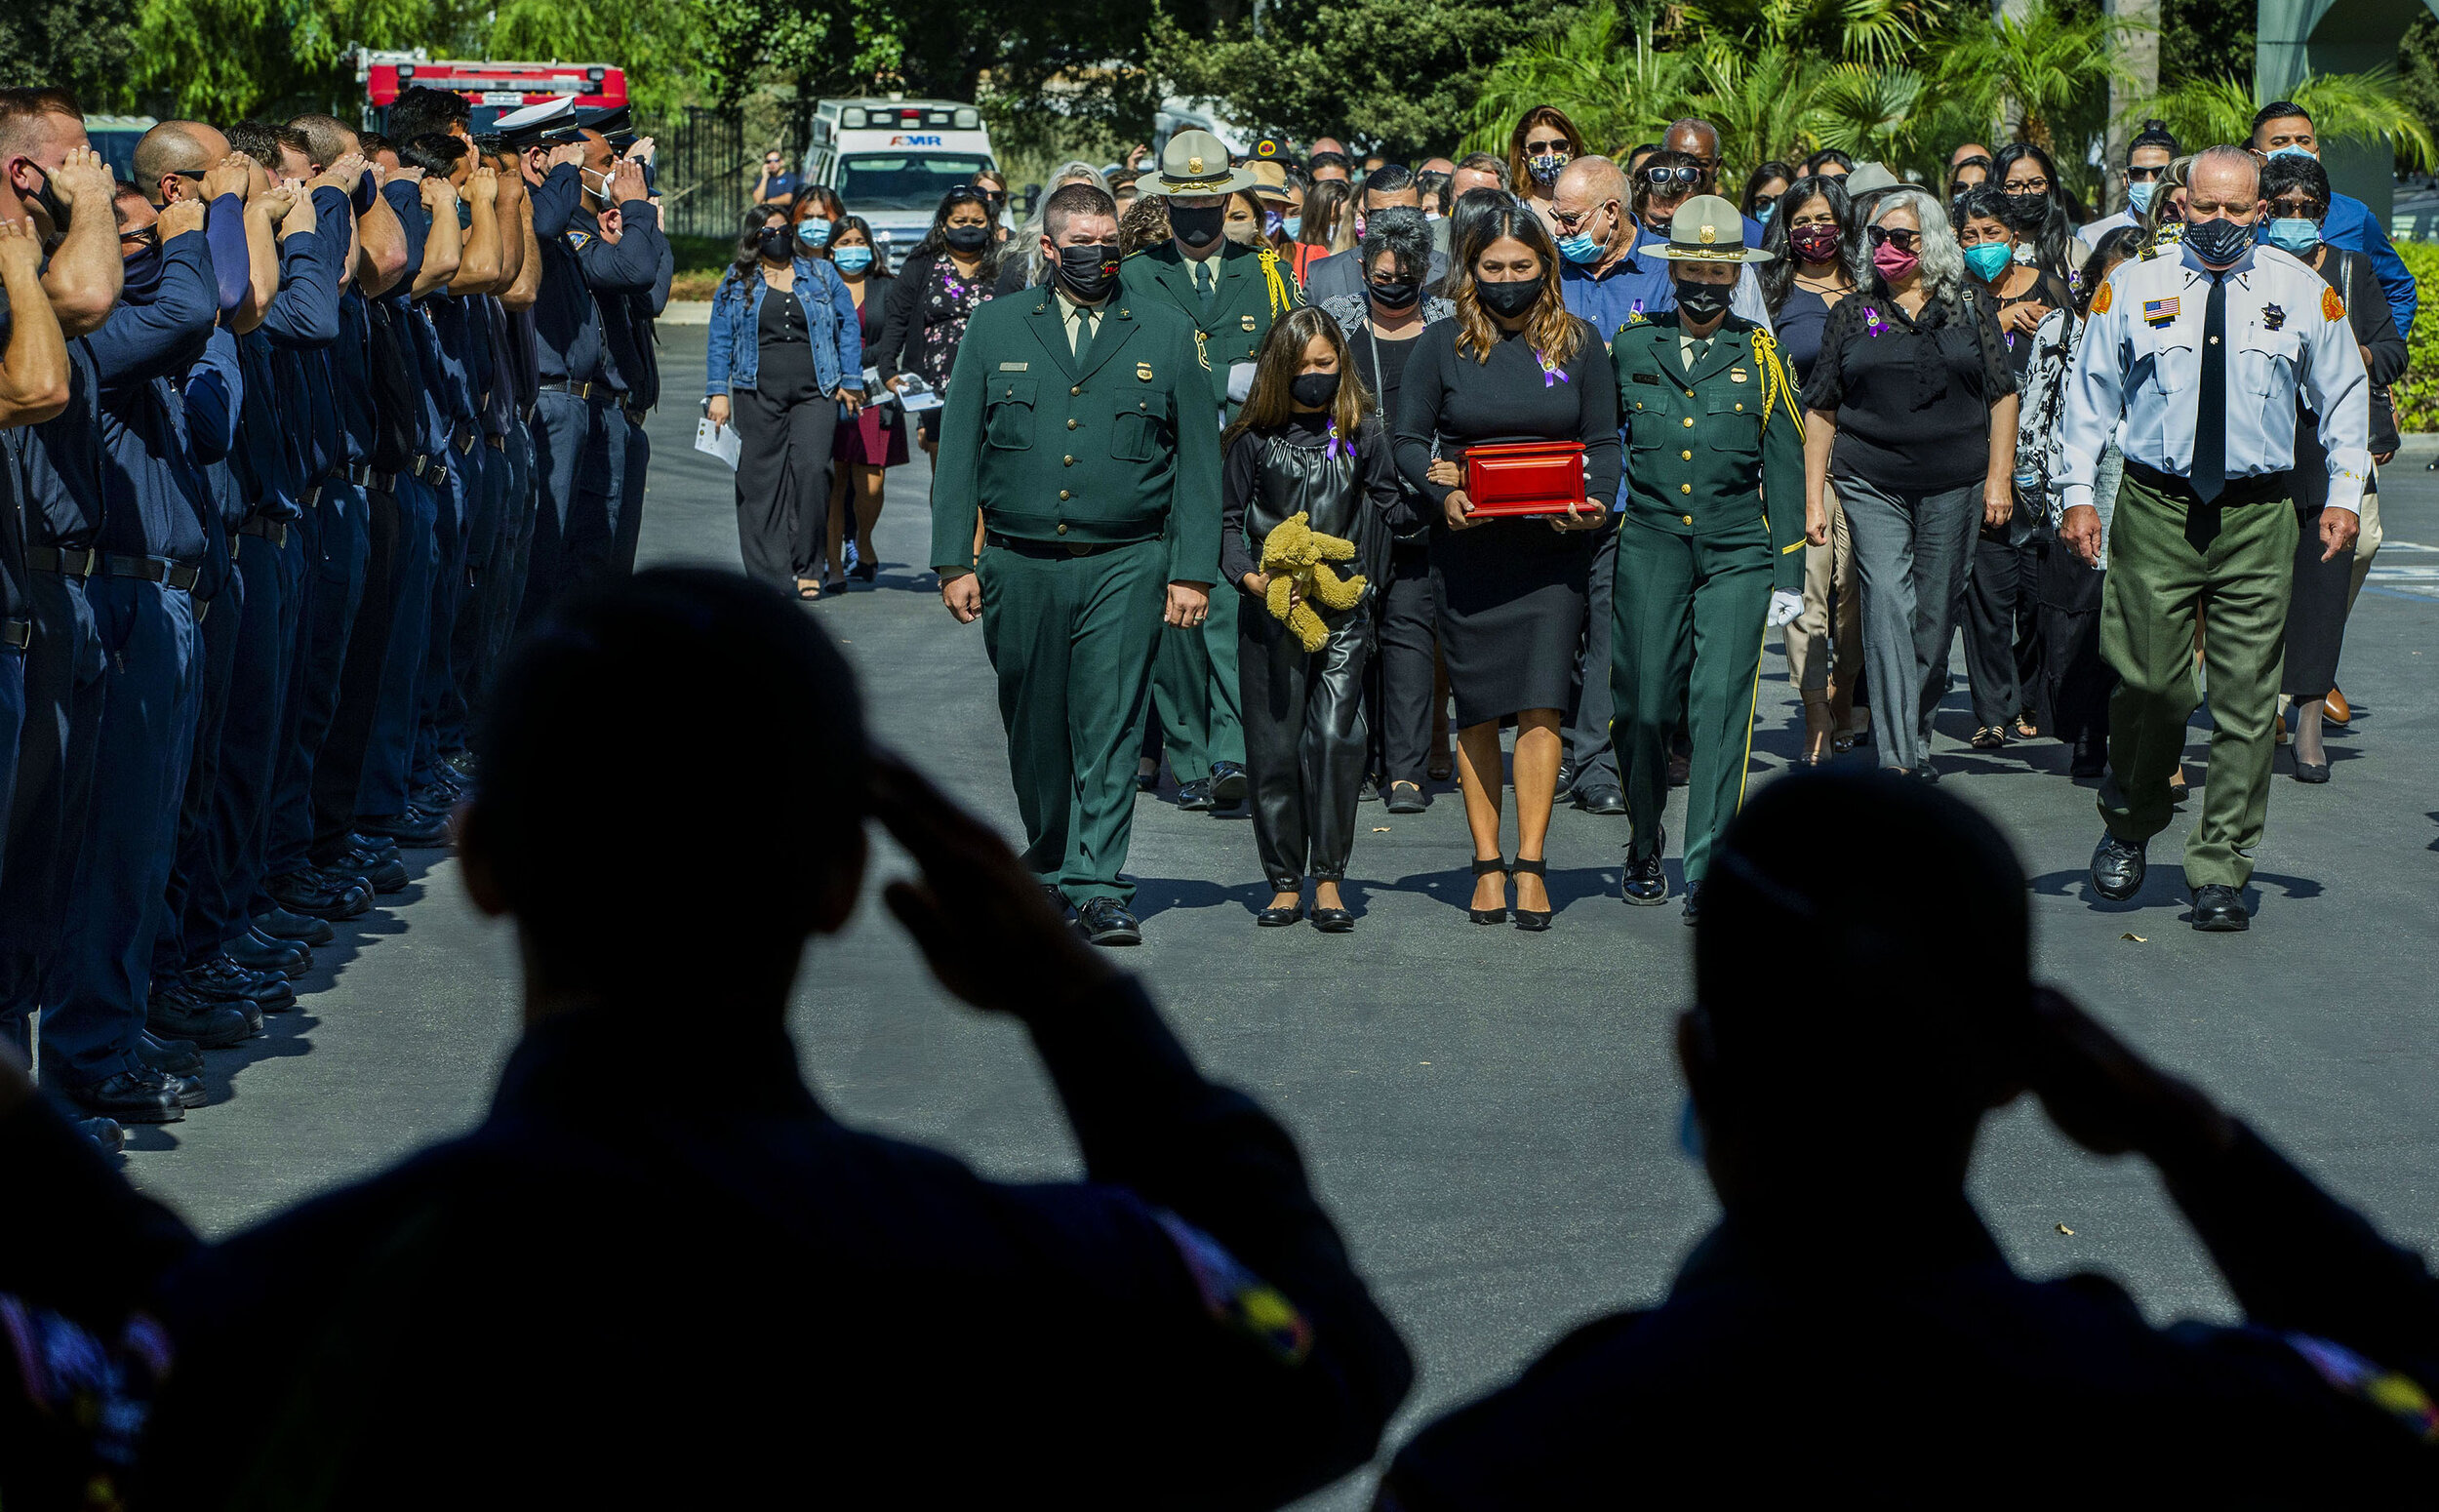  U.S. Forest Service Big Bear Hotshot Charles Morton was killed in the line of duty on Sept. 17 fighting the El Dorado Fire. Firefighters salute as Morton’s fiancee, Monica Tapia carries his urn during his memorial service at The Rock Church in San B